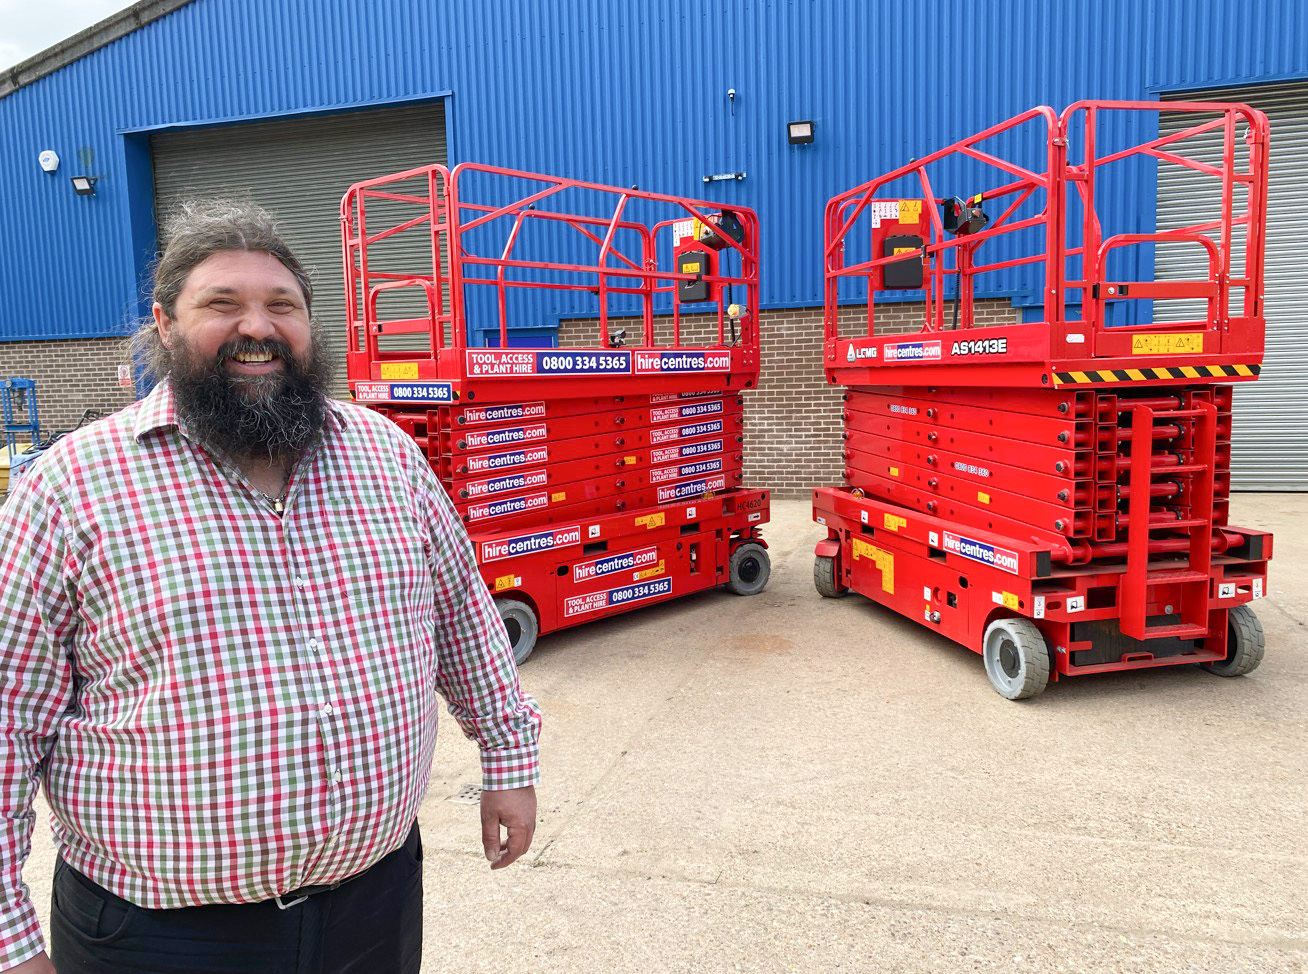 Hire specialist selects LGMG scissors after depot investment